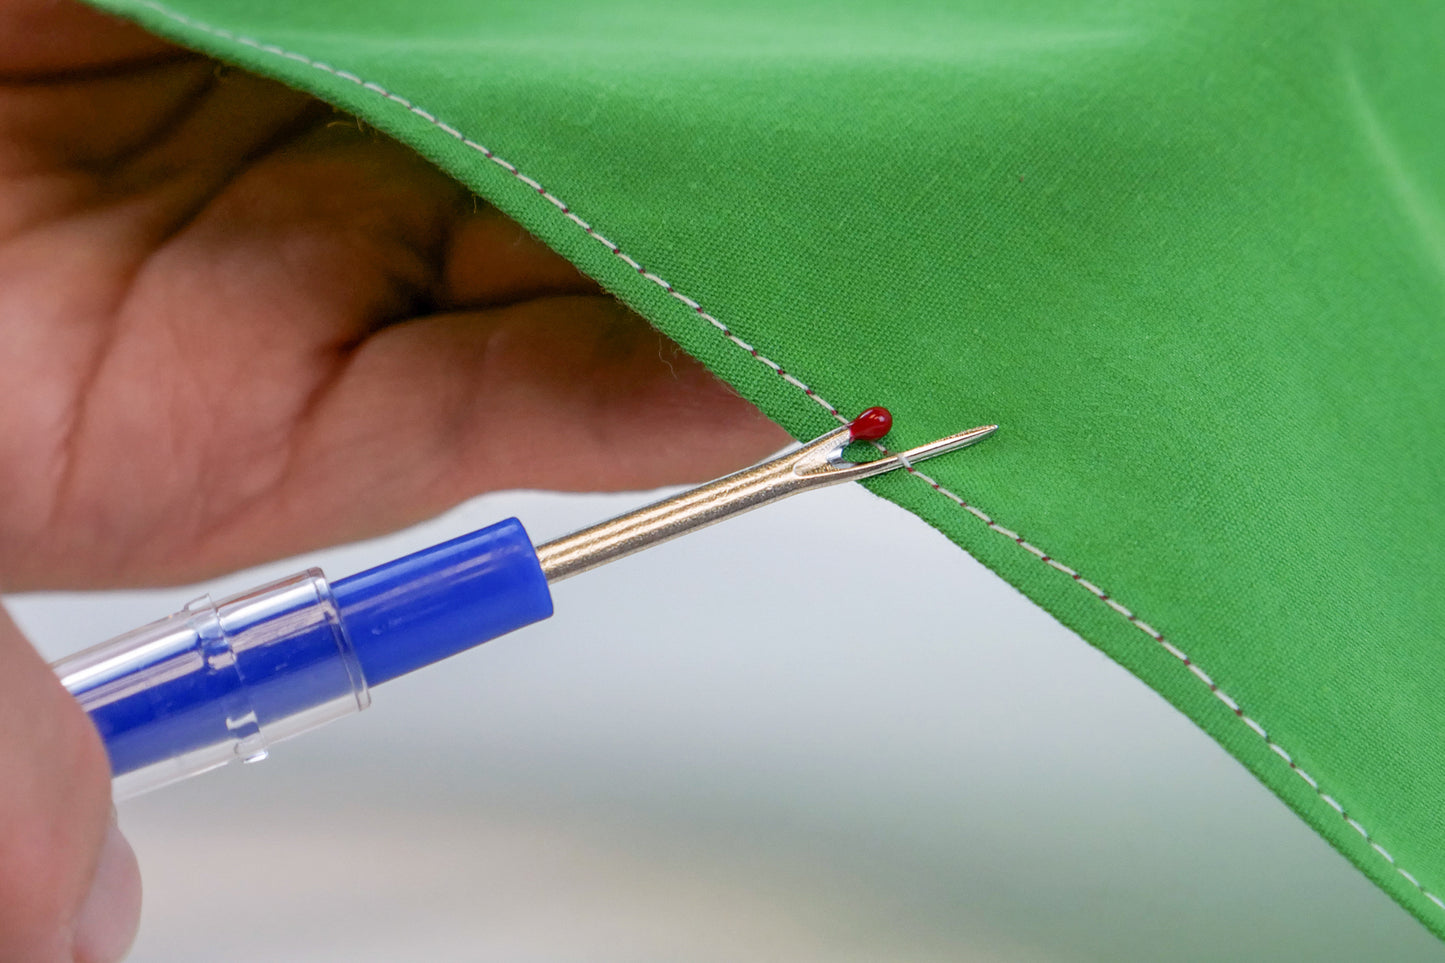 A lifestyle image of hands holding the seam ripper to rip a white thread seam on green fabric.